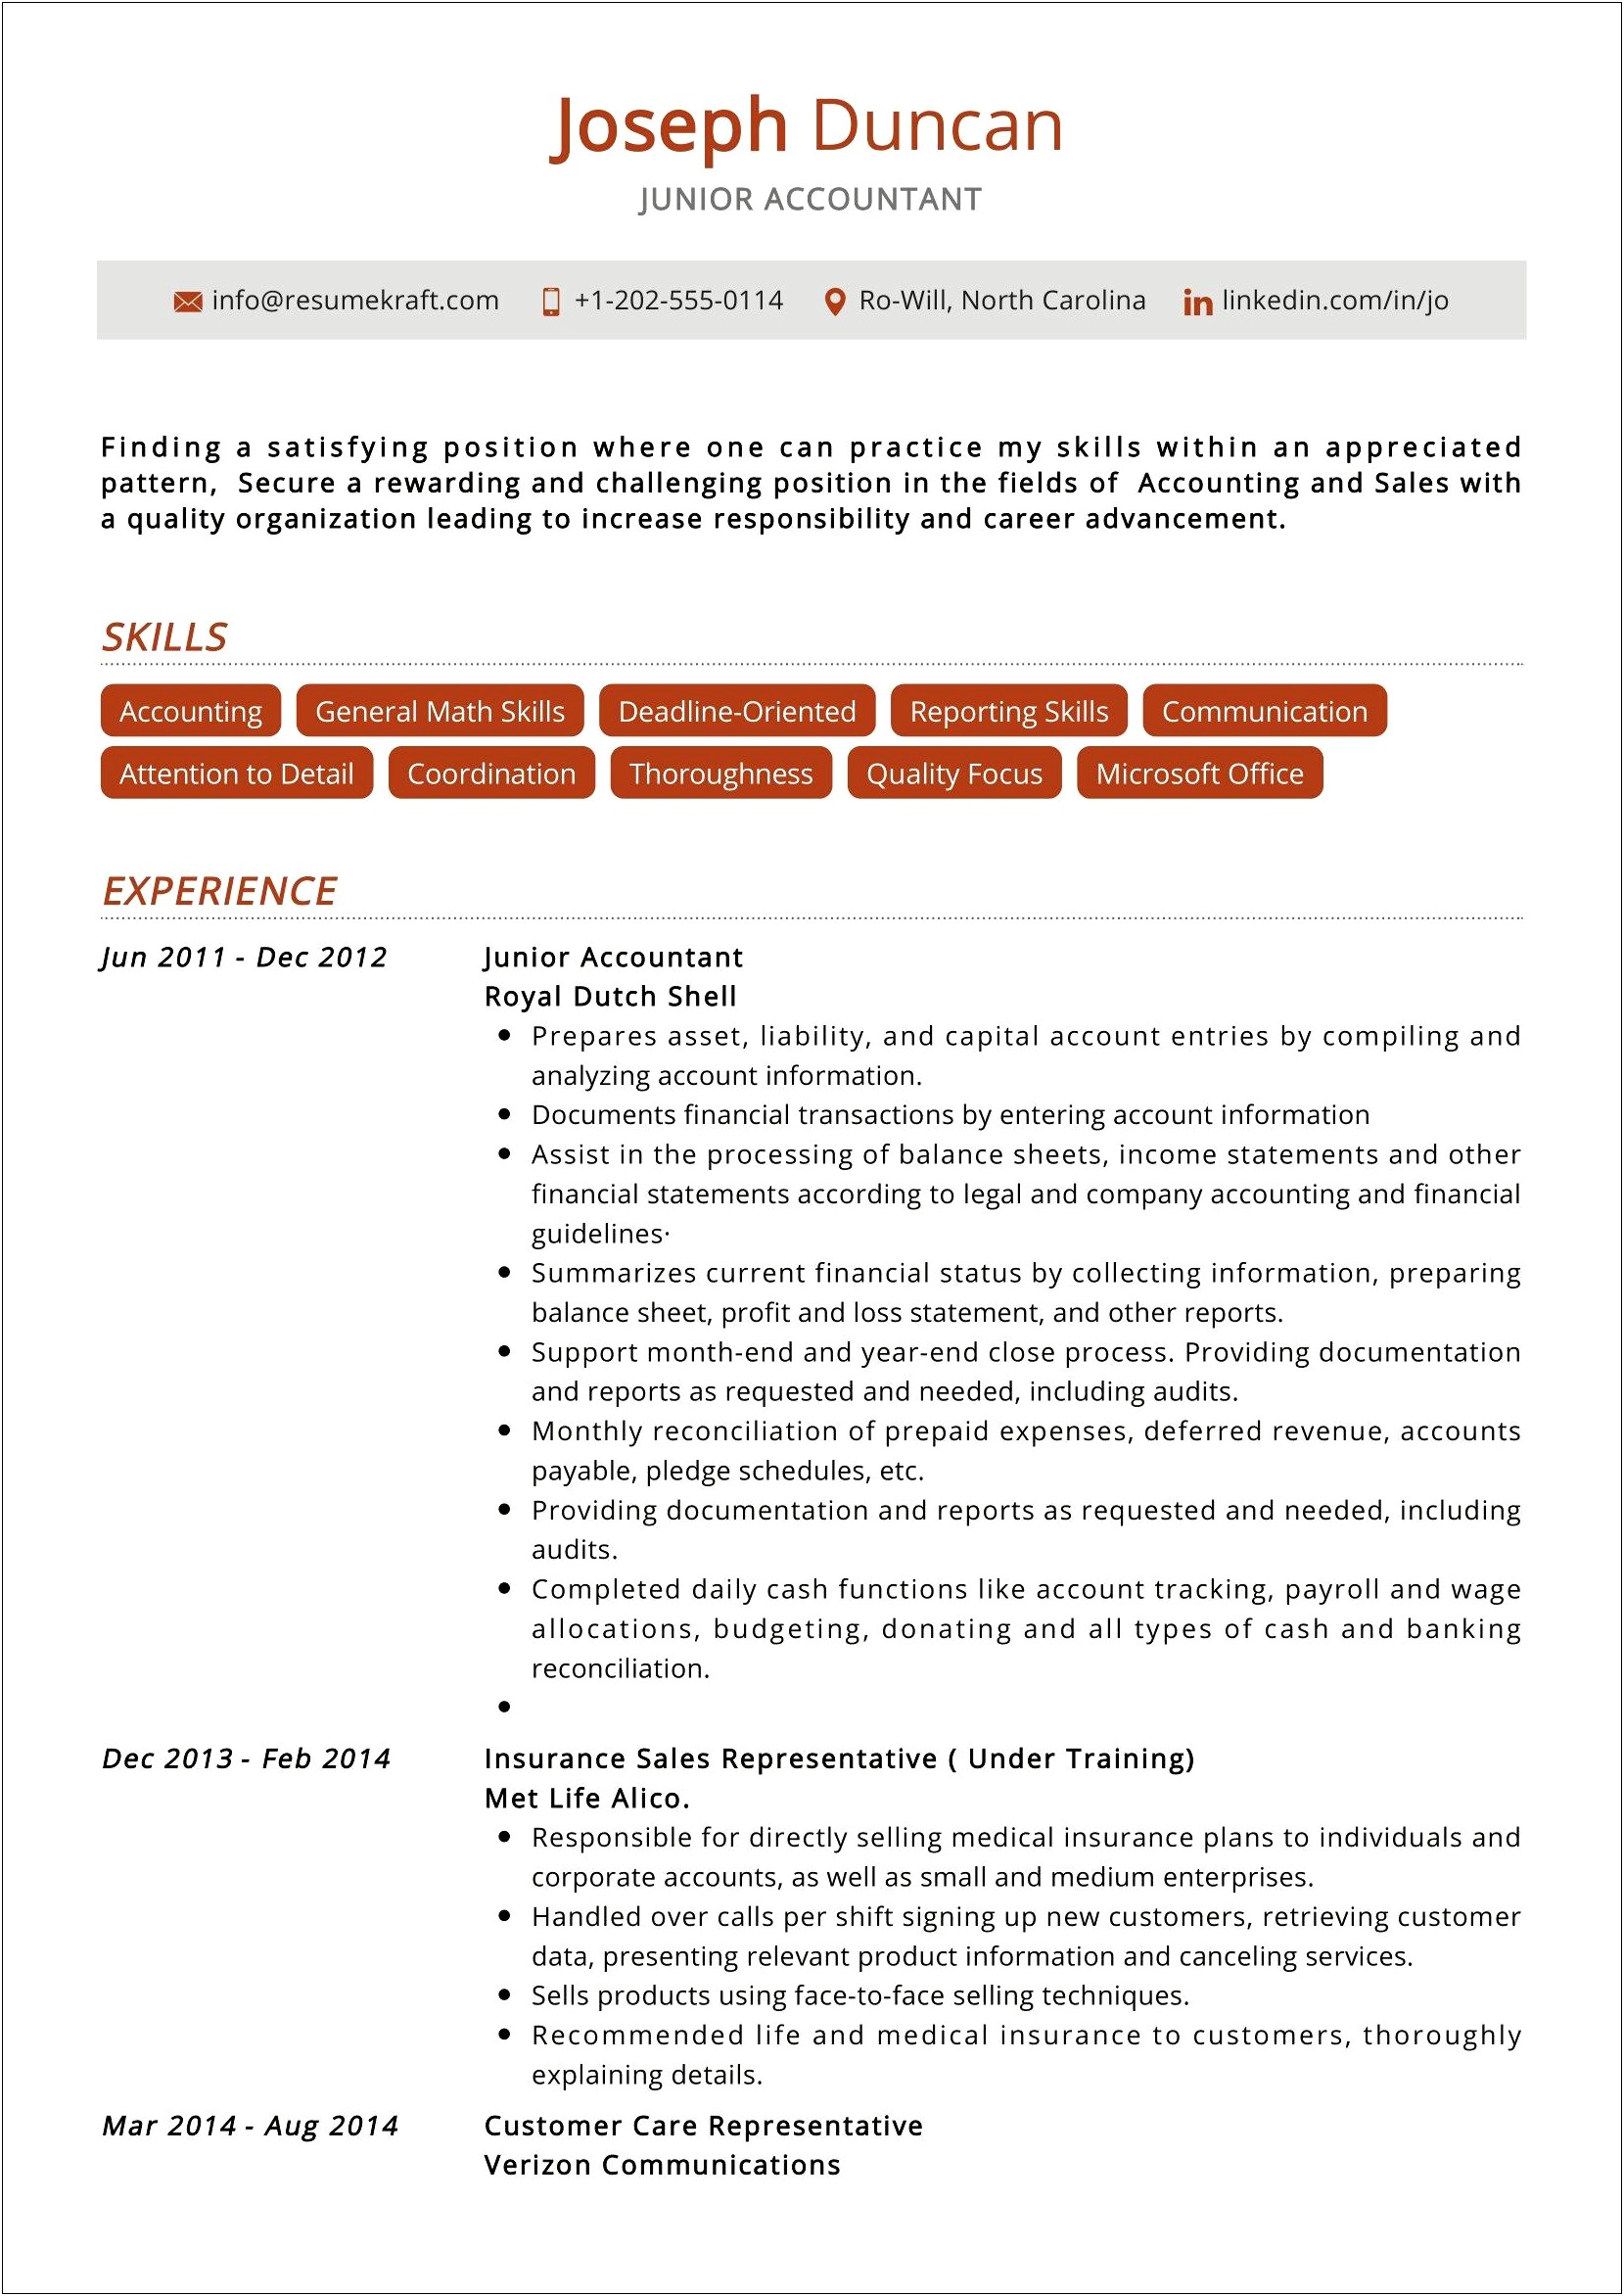 Sample Resume For Account Executive Position